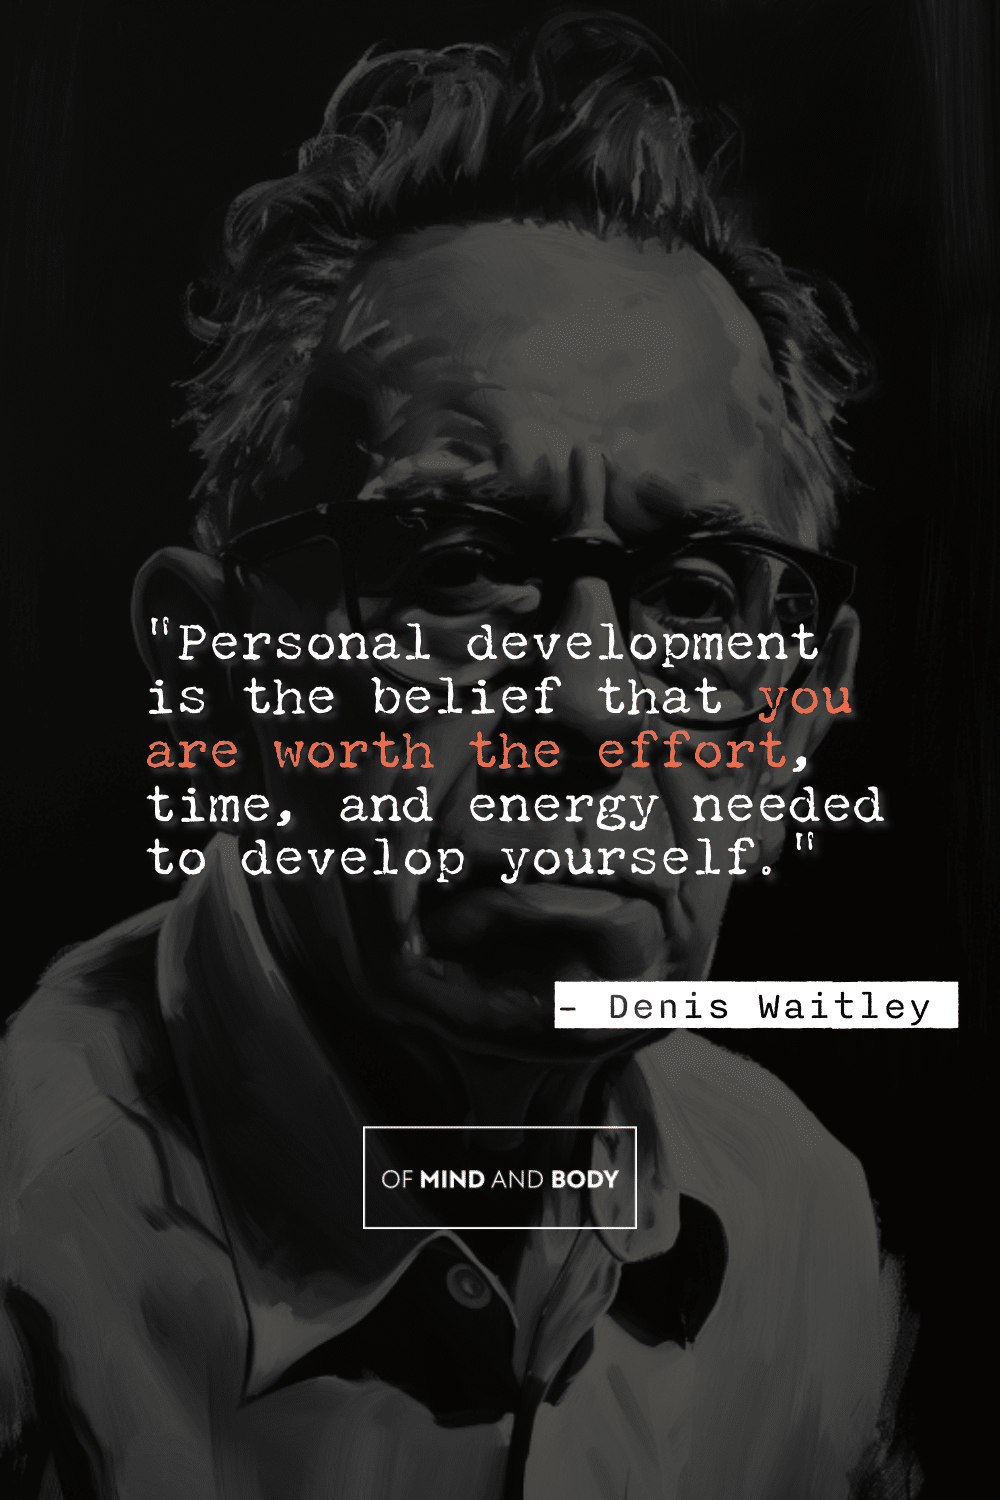 Quotes on Self Improvement - "Personal development is the belief that you are worth the effort, time, and energy needed to develop yourself."